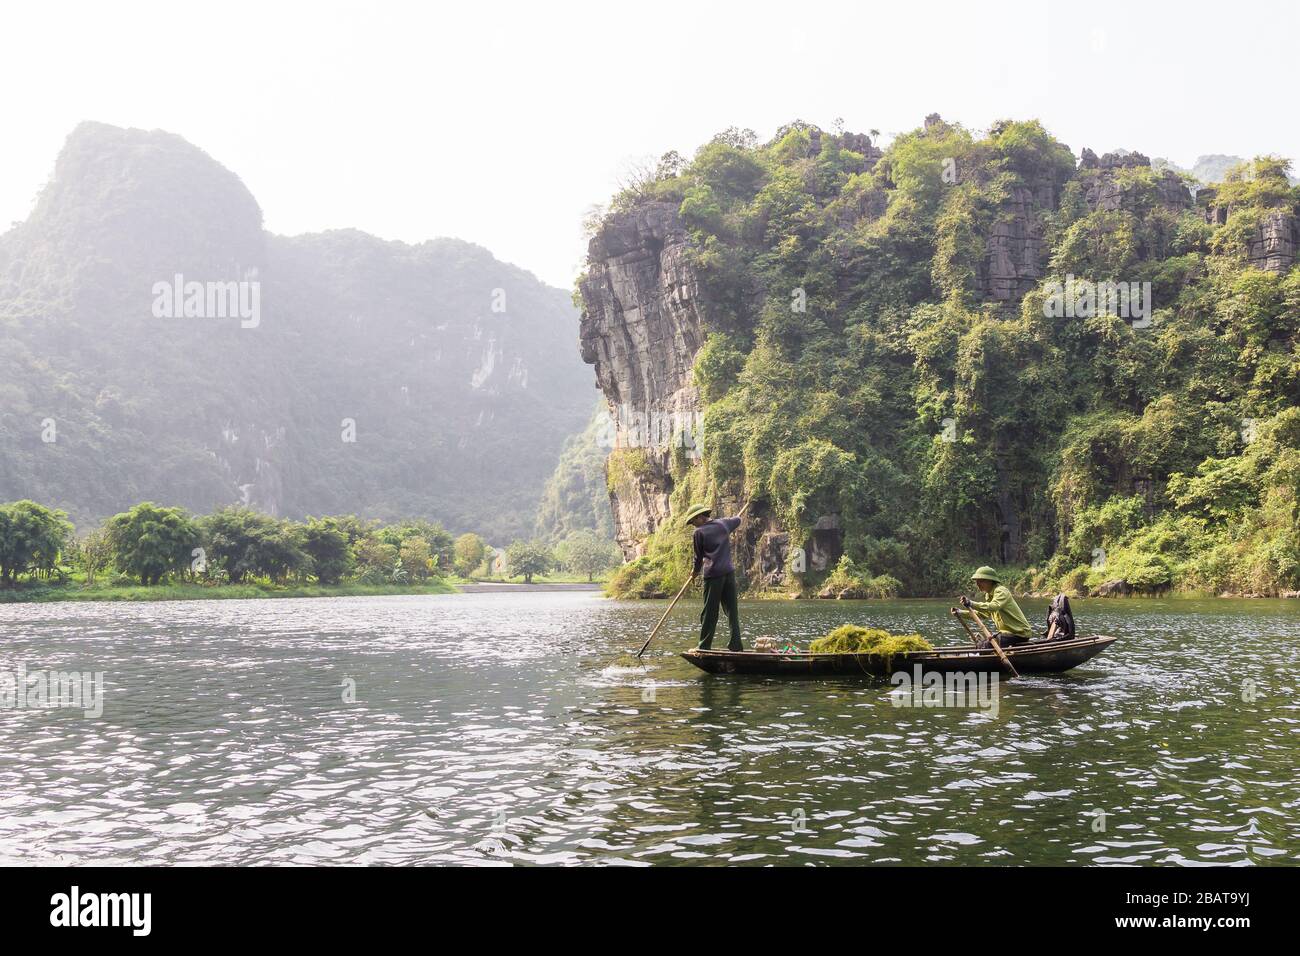 Vietnam Trang An Landscape - Two Vietnamese men in rowboat in the Red River Delta in Ninh Binh Province of North Vietnam, Southeast Asia. Stock Photo